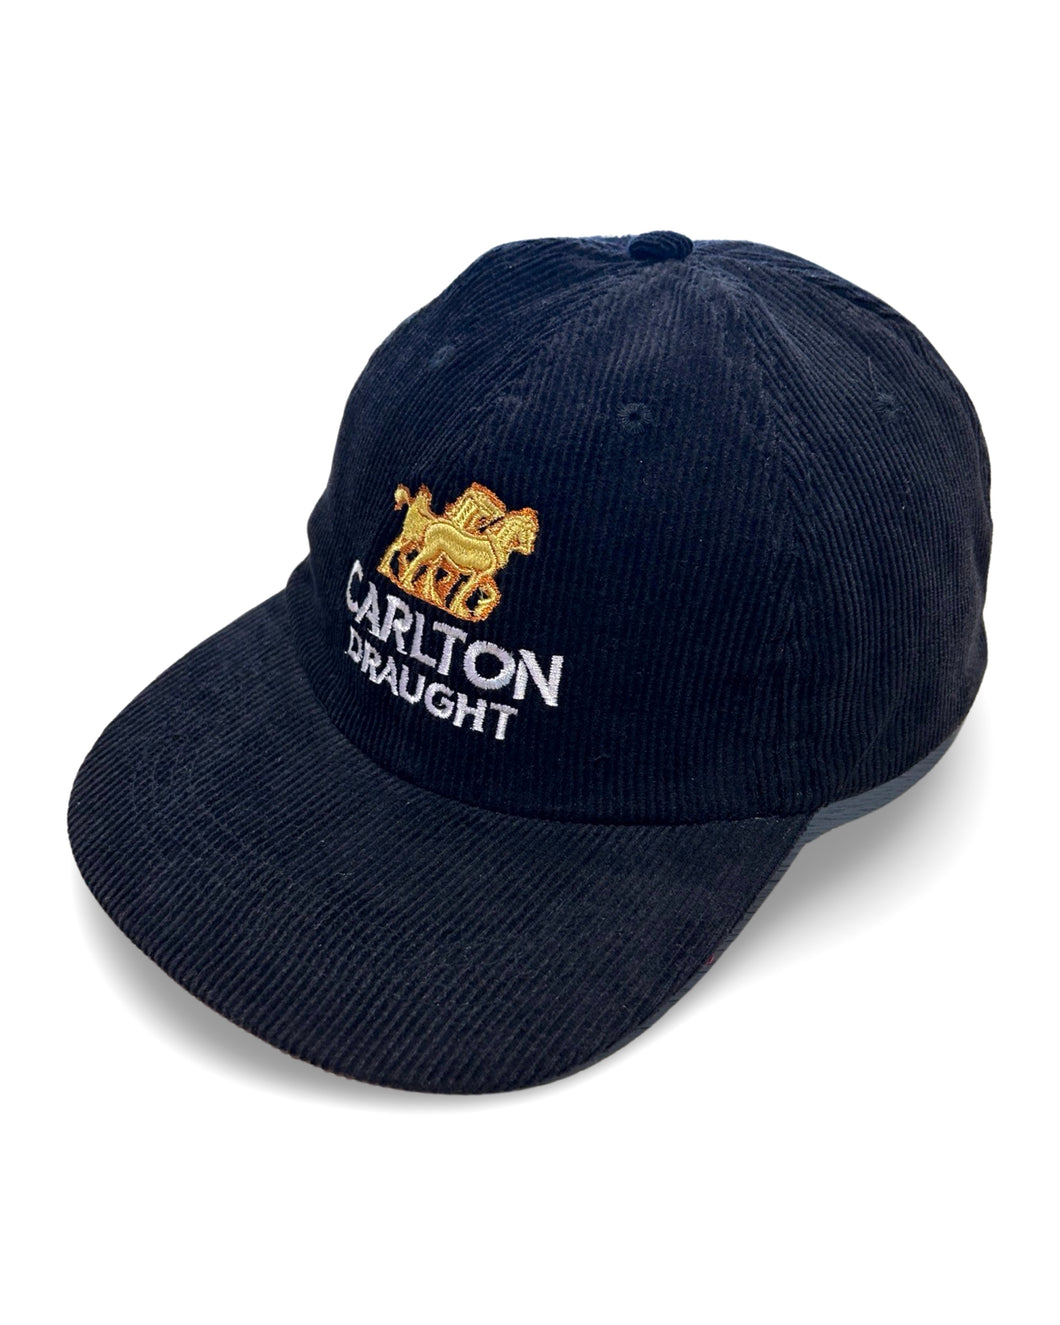 Carlton Draught Licensed Corduroy Snapback Hat in Black ⏐ One Size